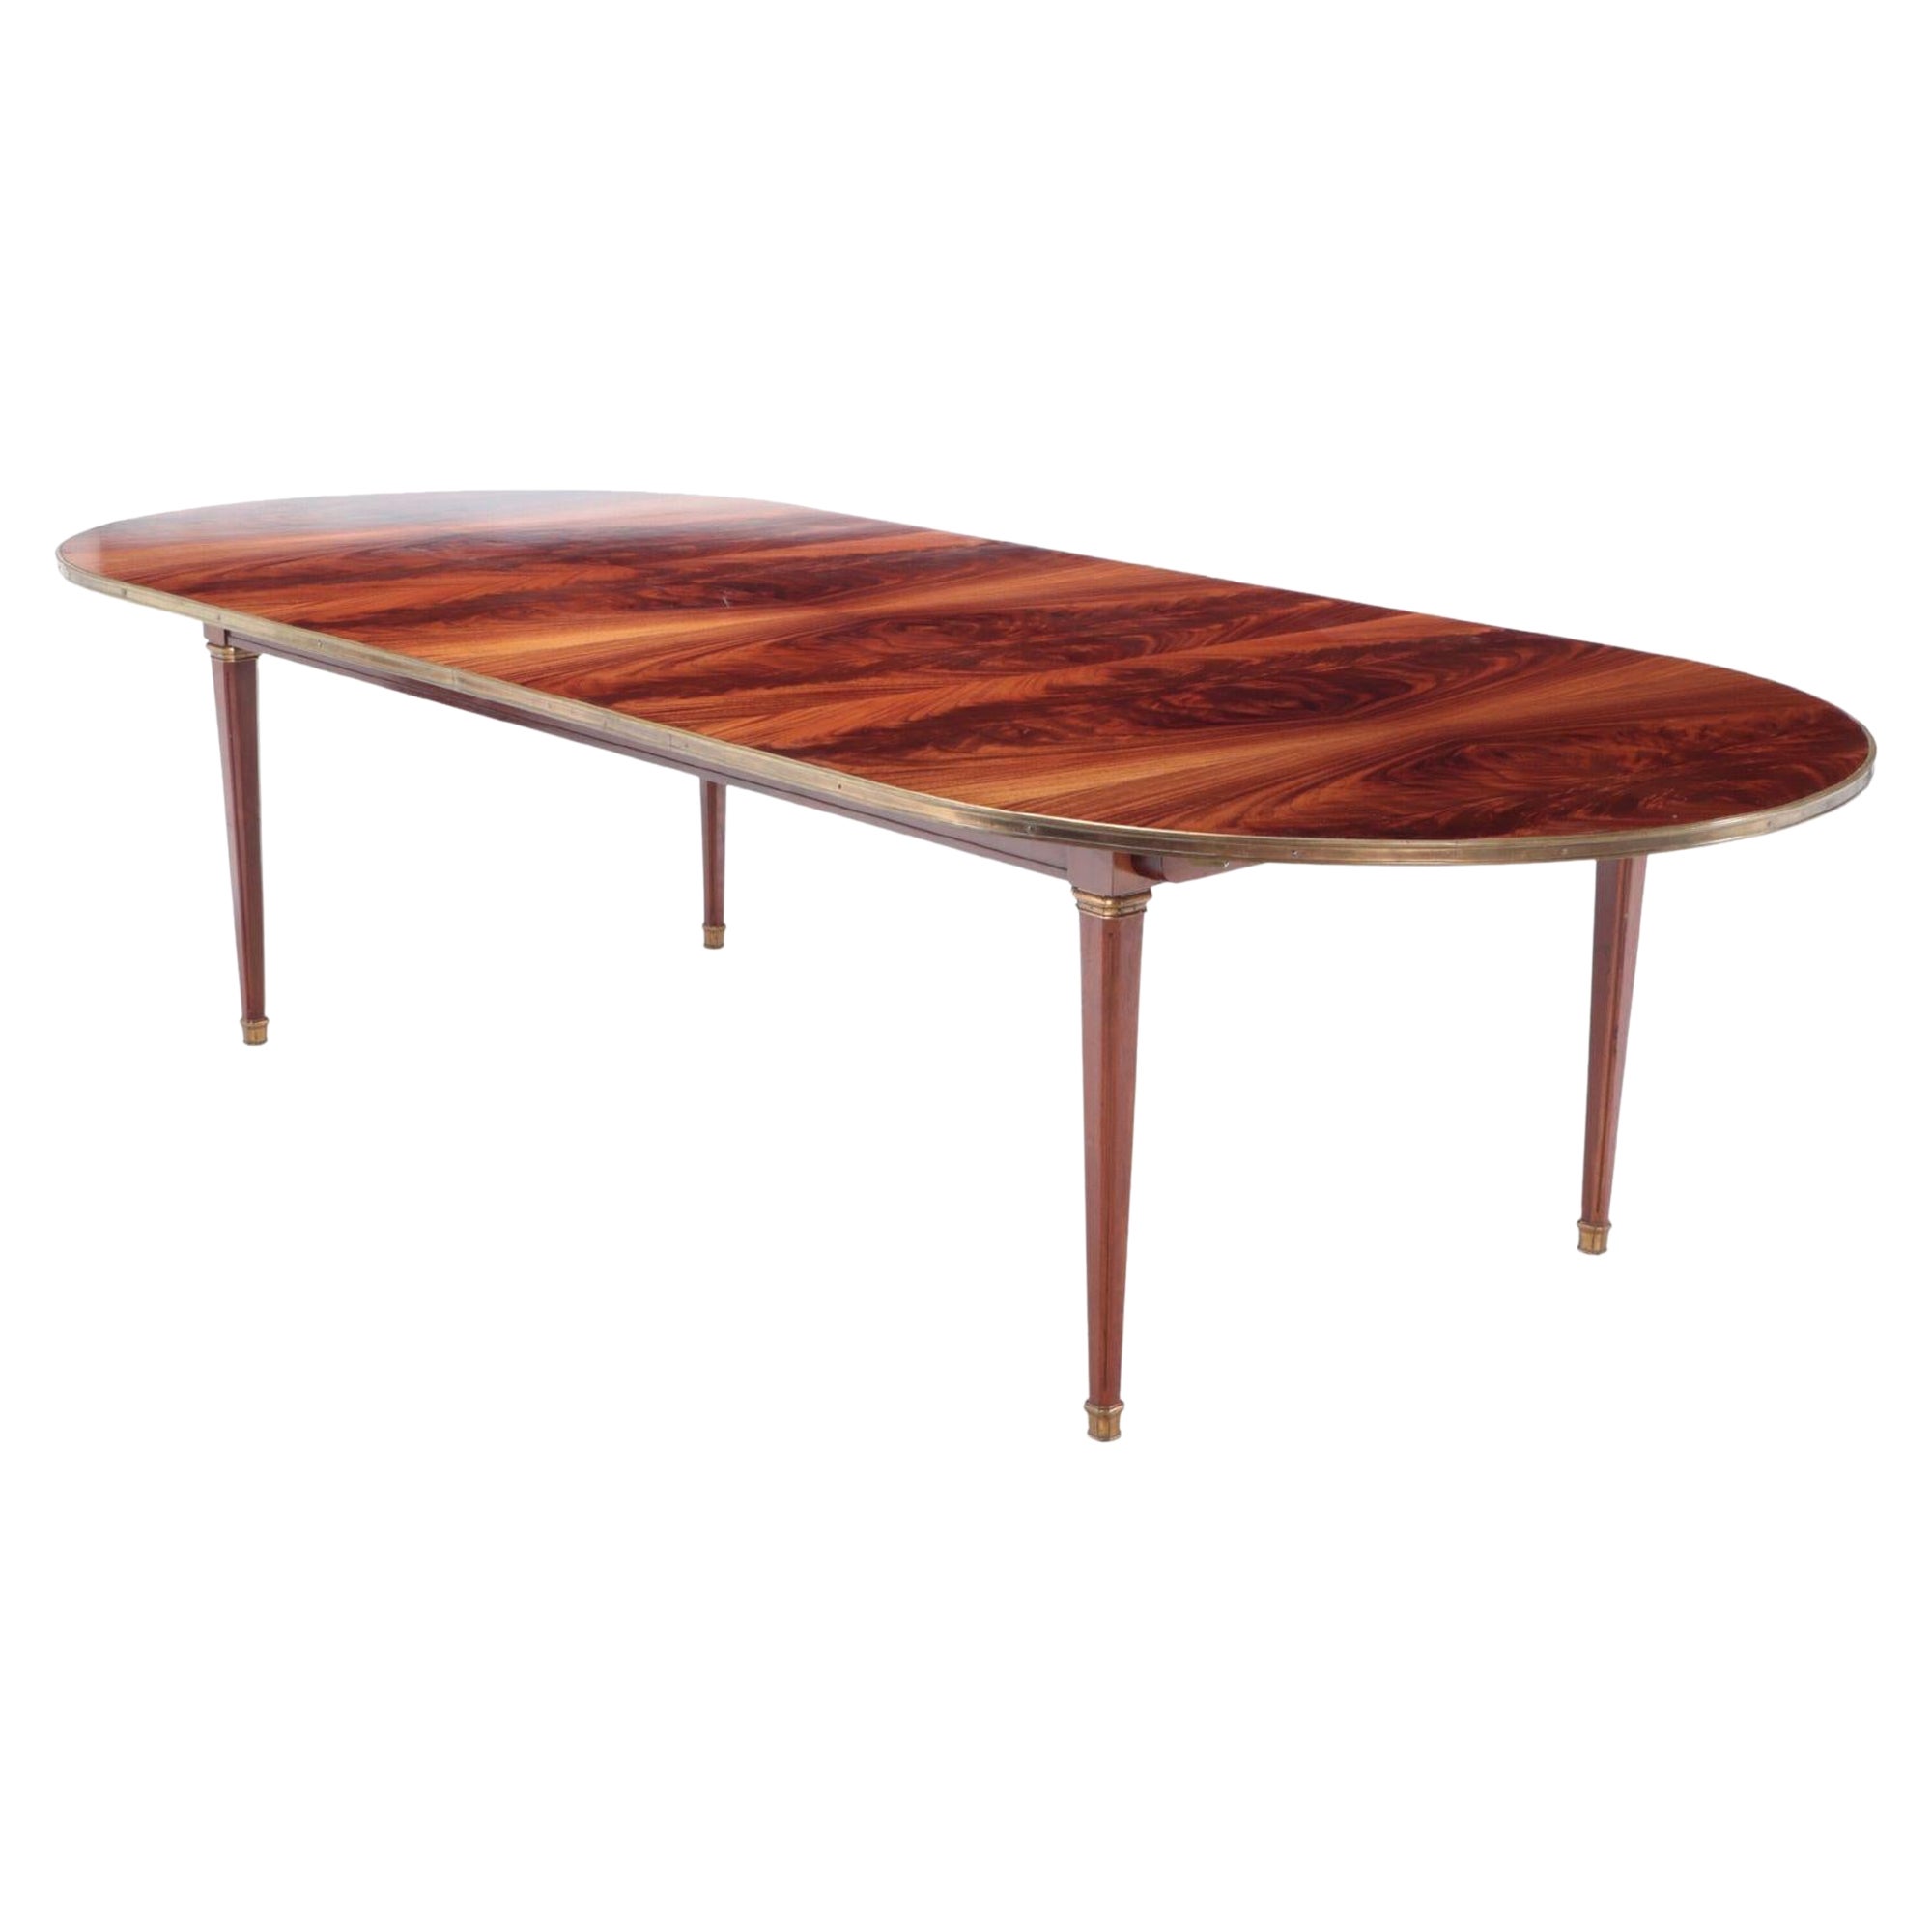 Large Bronze Mounted Flame Mahogany Dining Table with 2 Leaves, circa 1945